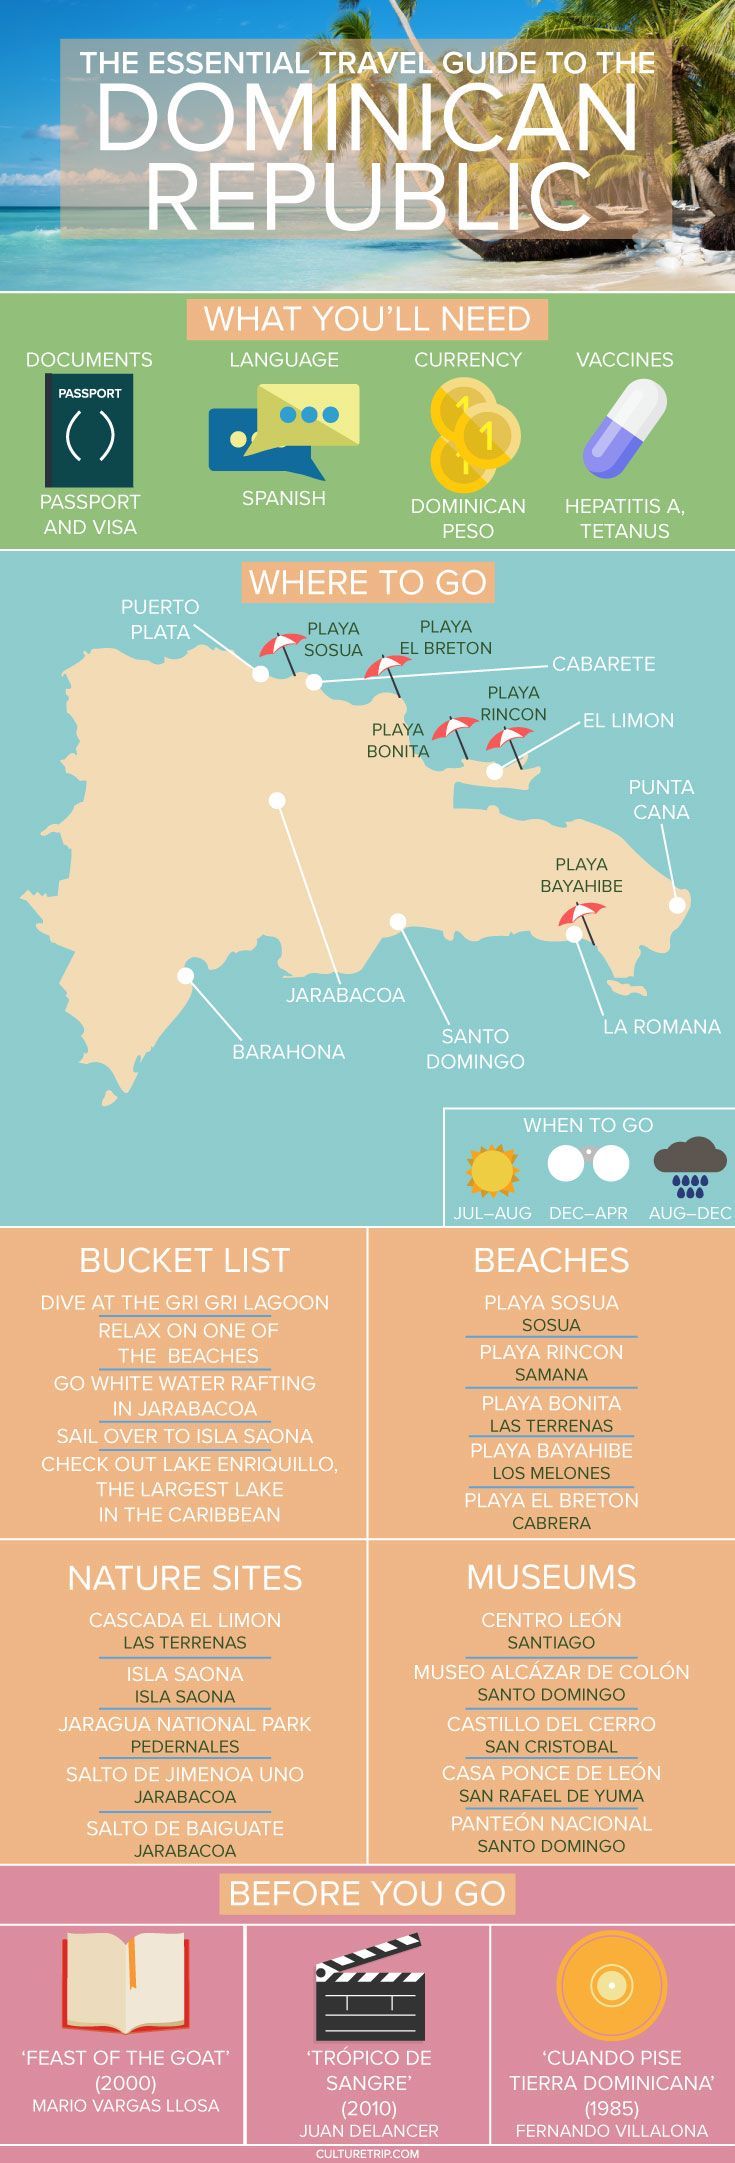 The Essential Travel Guide to the Dominican Republic (Infographic)